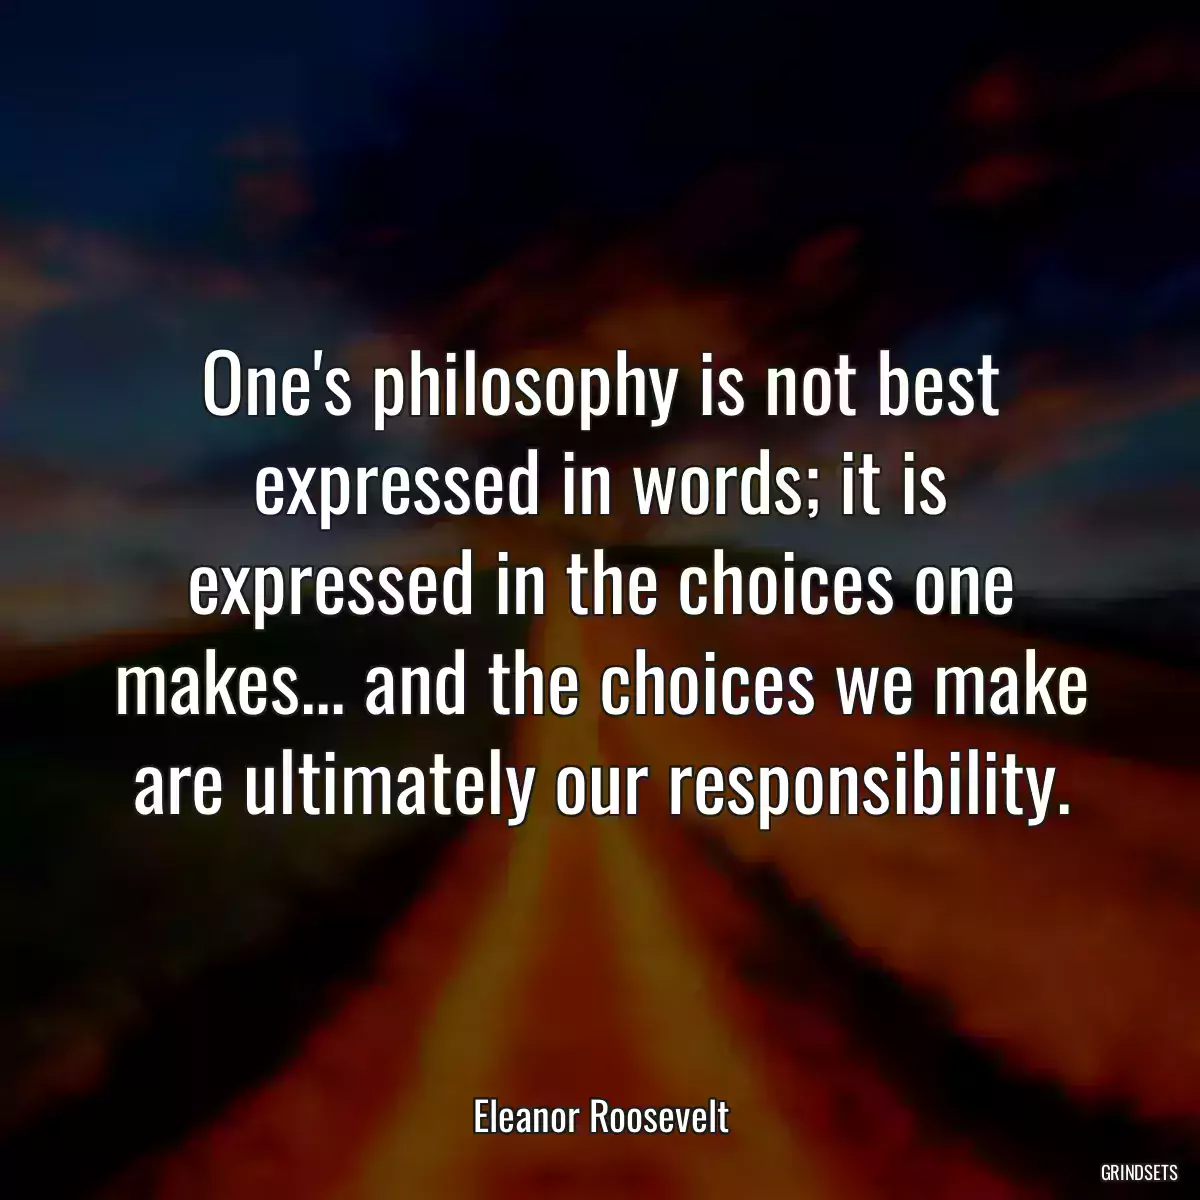 One\'s philosophy is not best expressed in words; it is expressed in the choices one makes... and the choices we make are ultimately our responsibility.